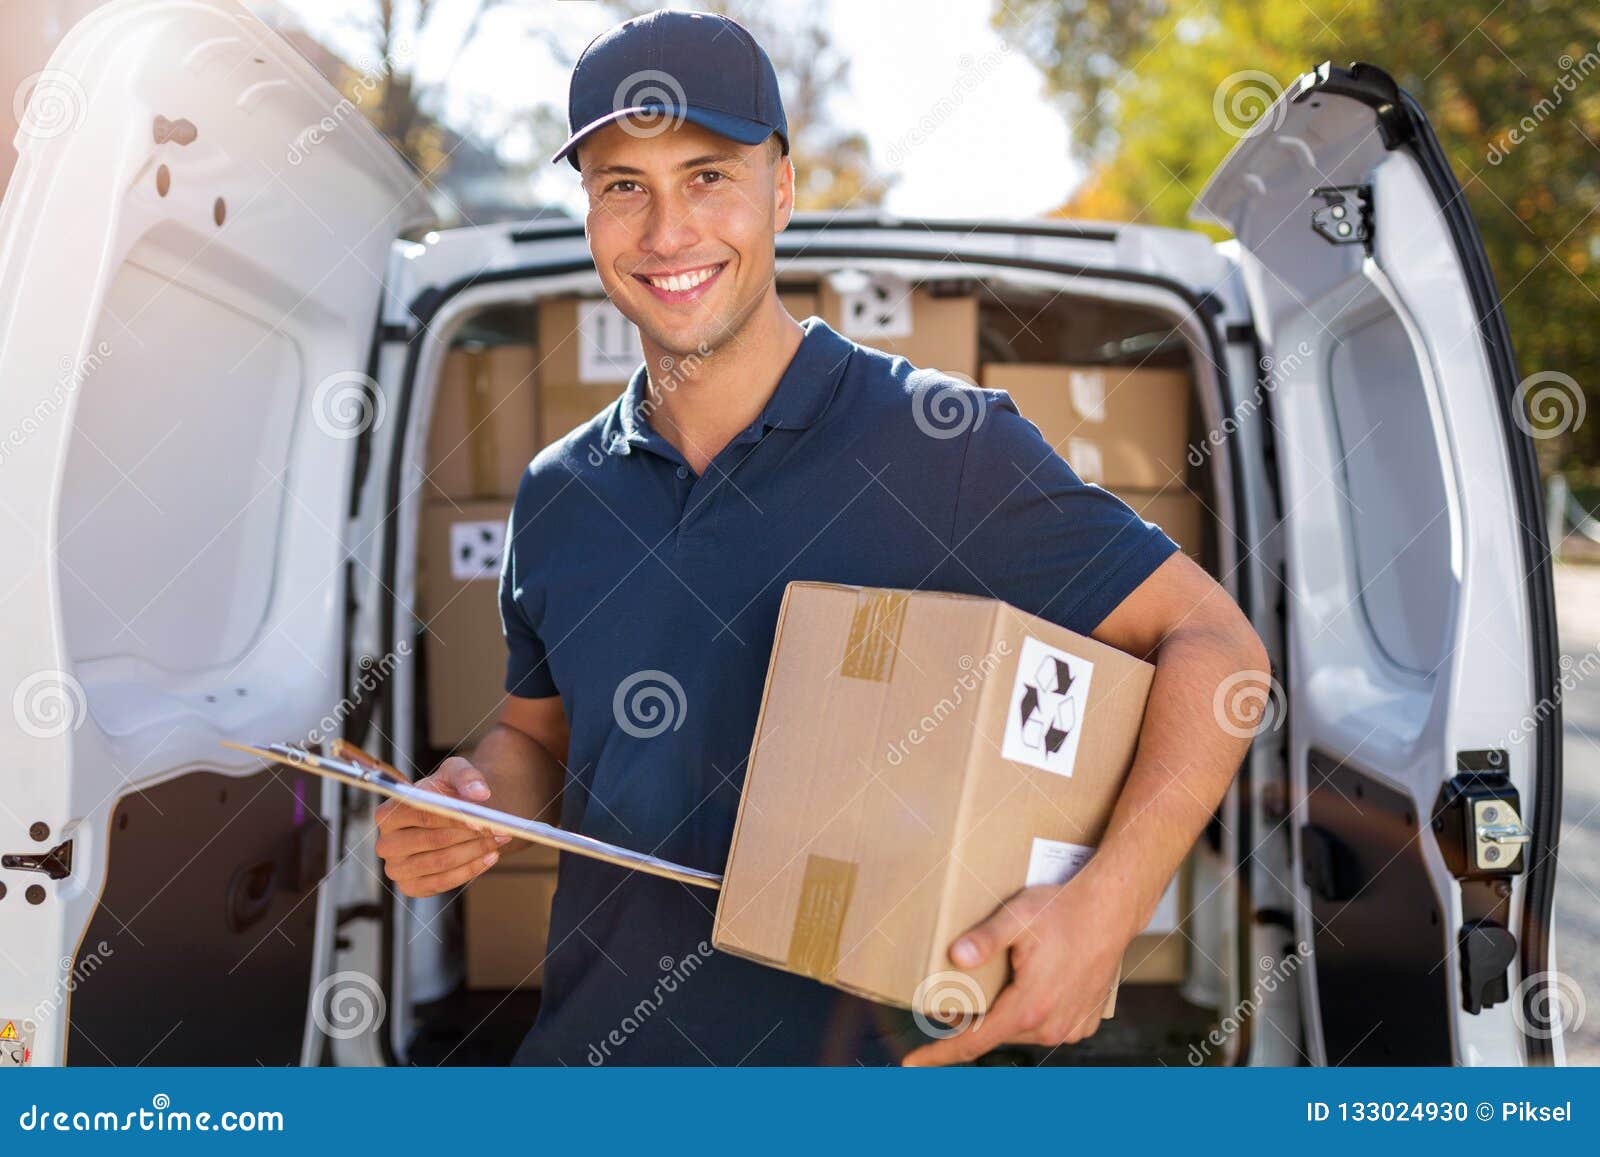 smiling delivery man loading boxes into his truck